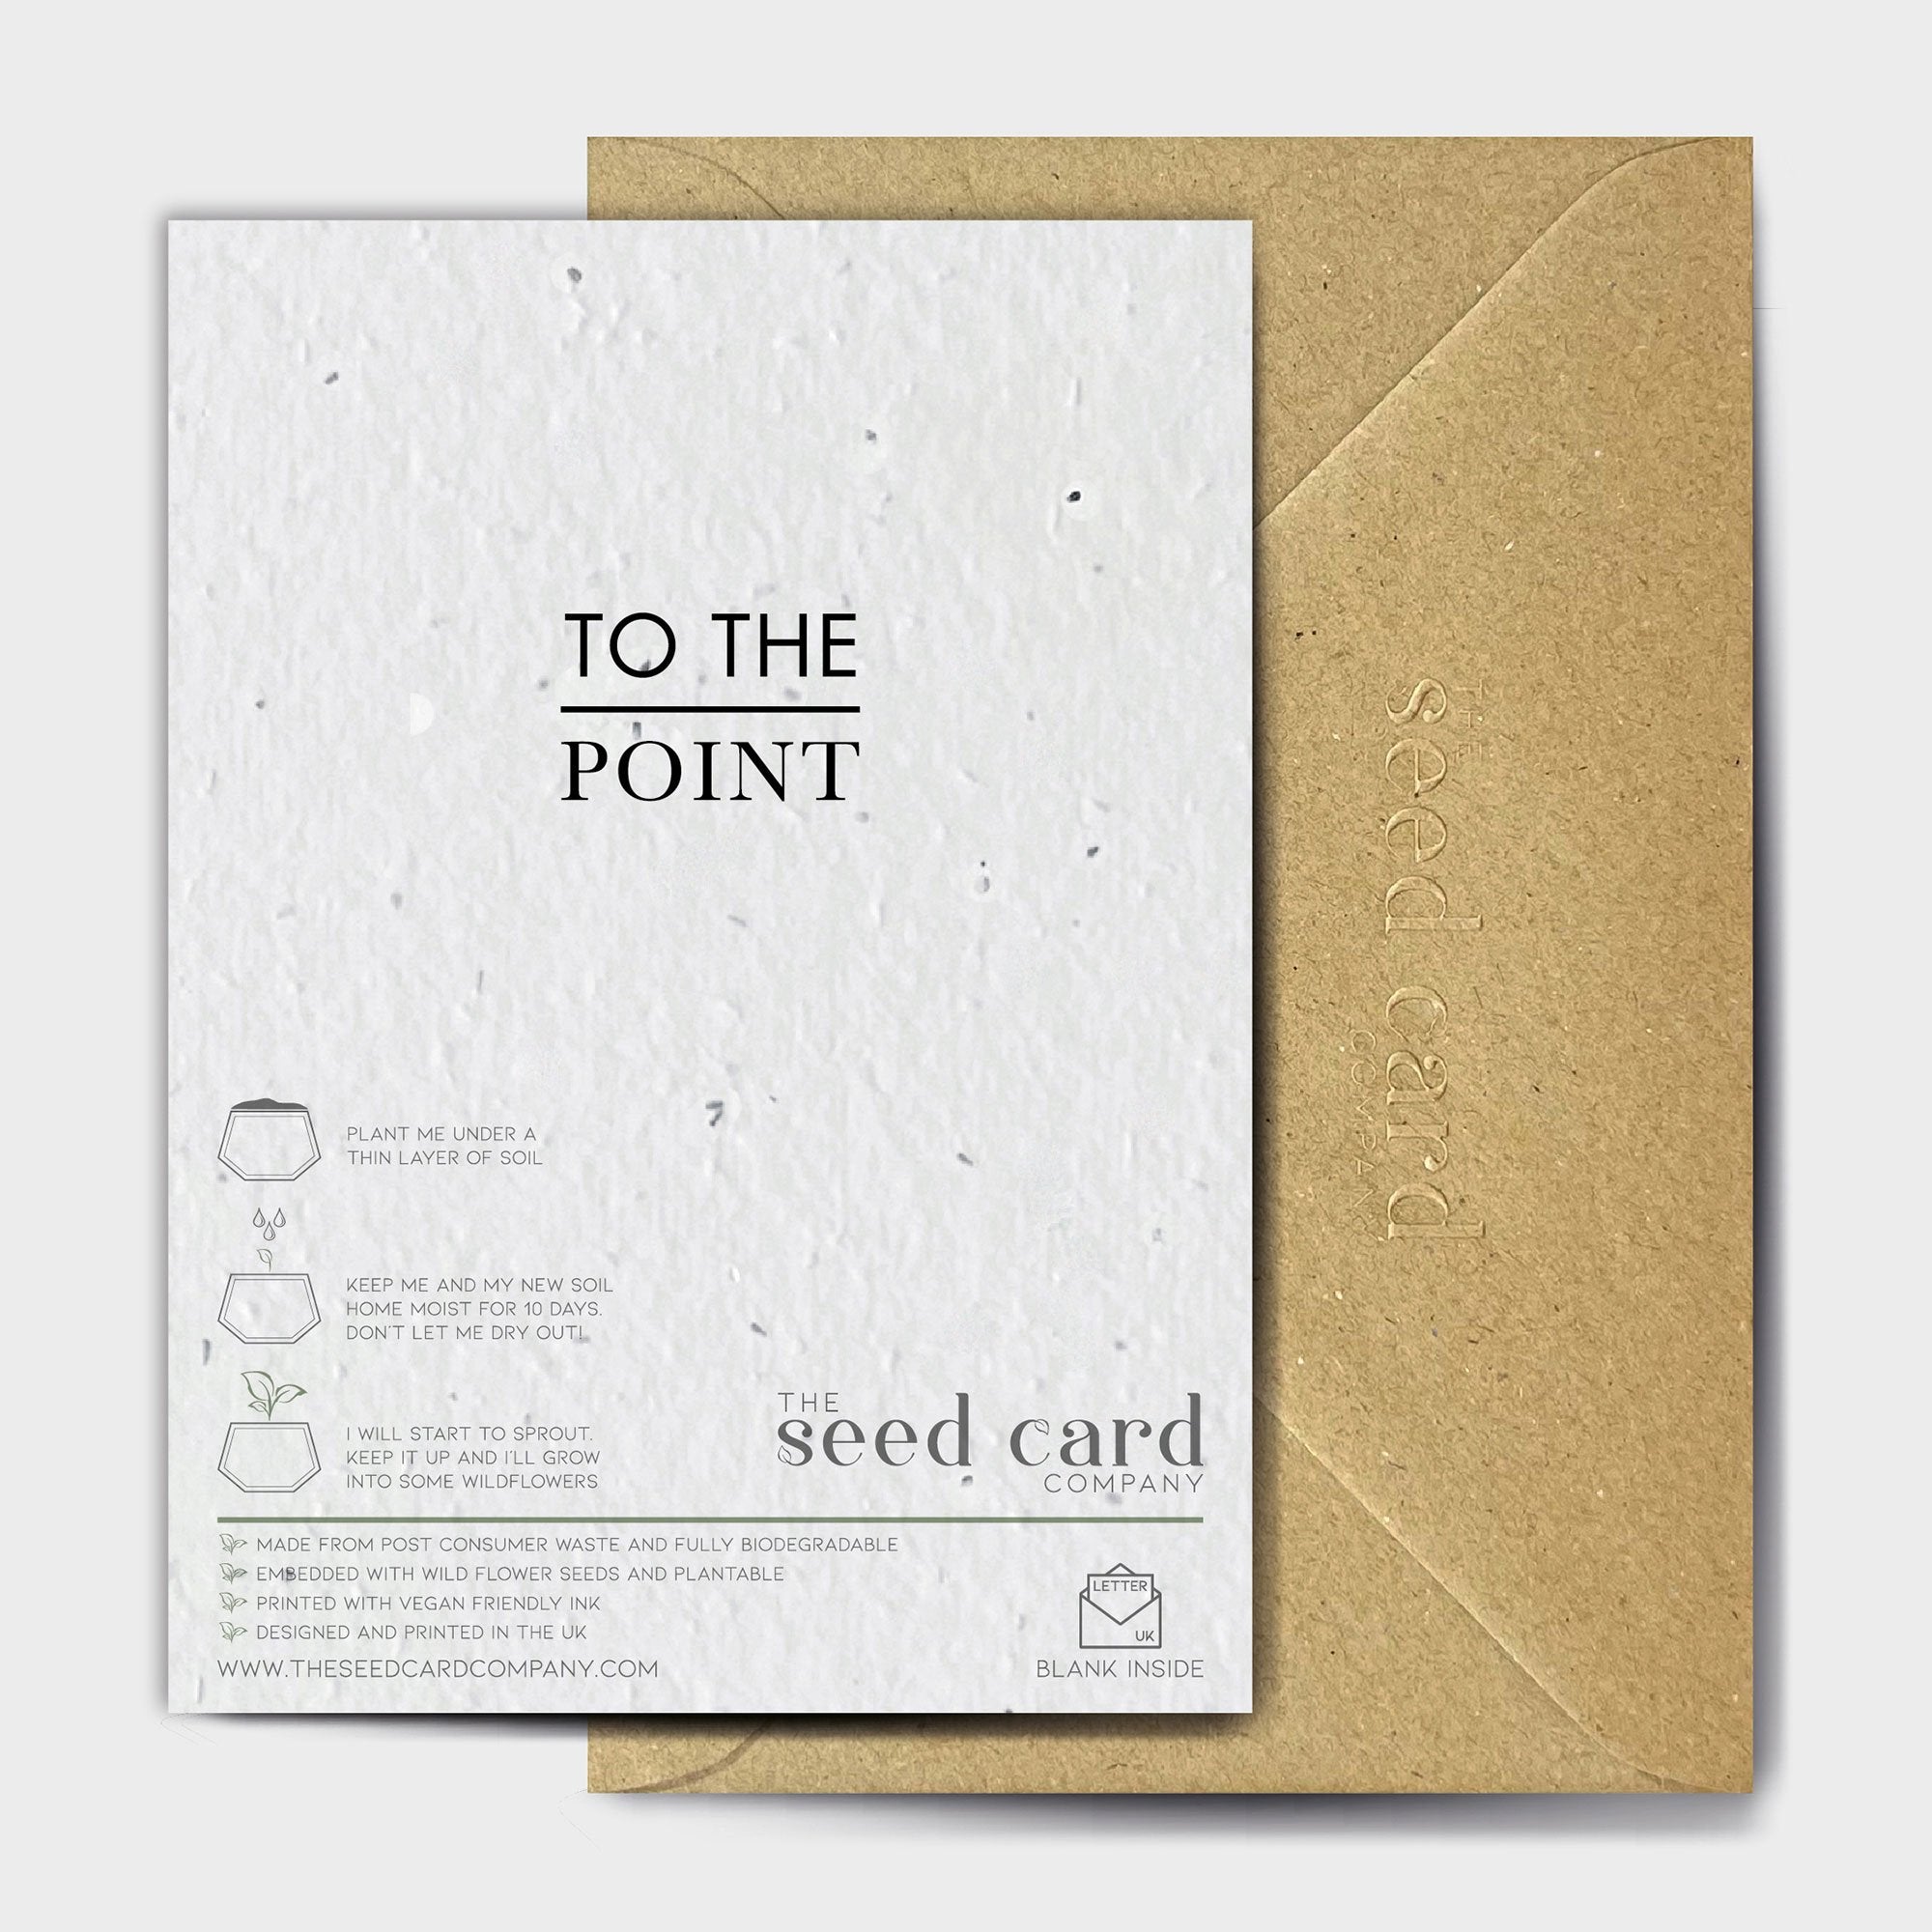 Shop online Don't Judge Me - 100% biodegradable seed-embedded cards Shop -The Seed Card Company